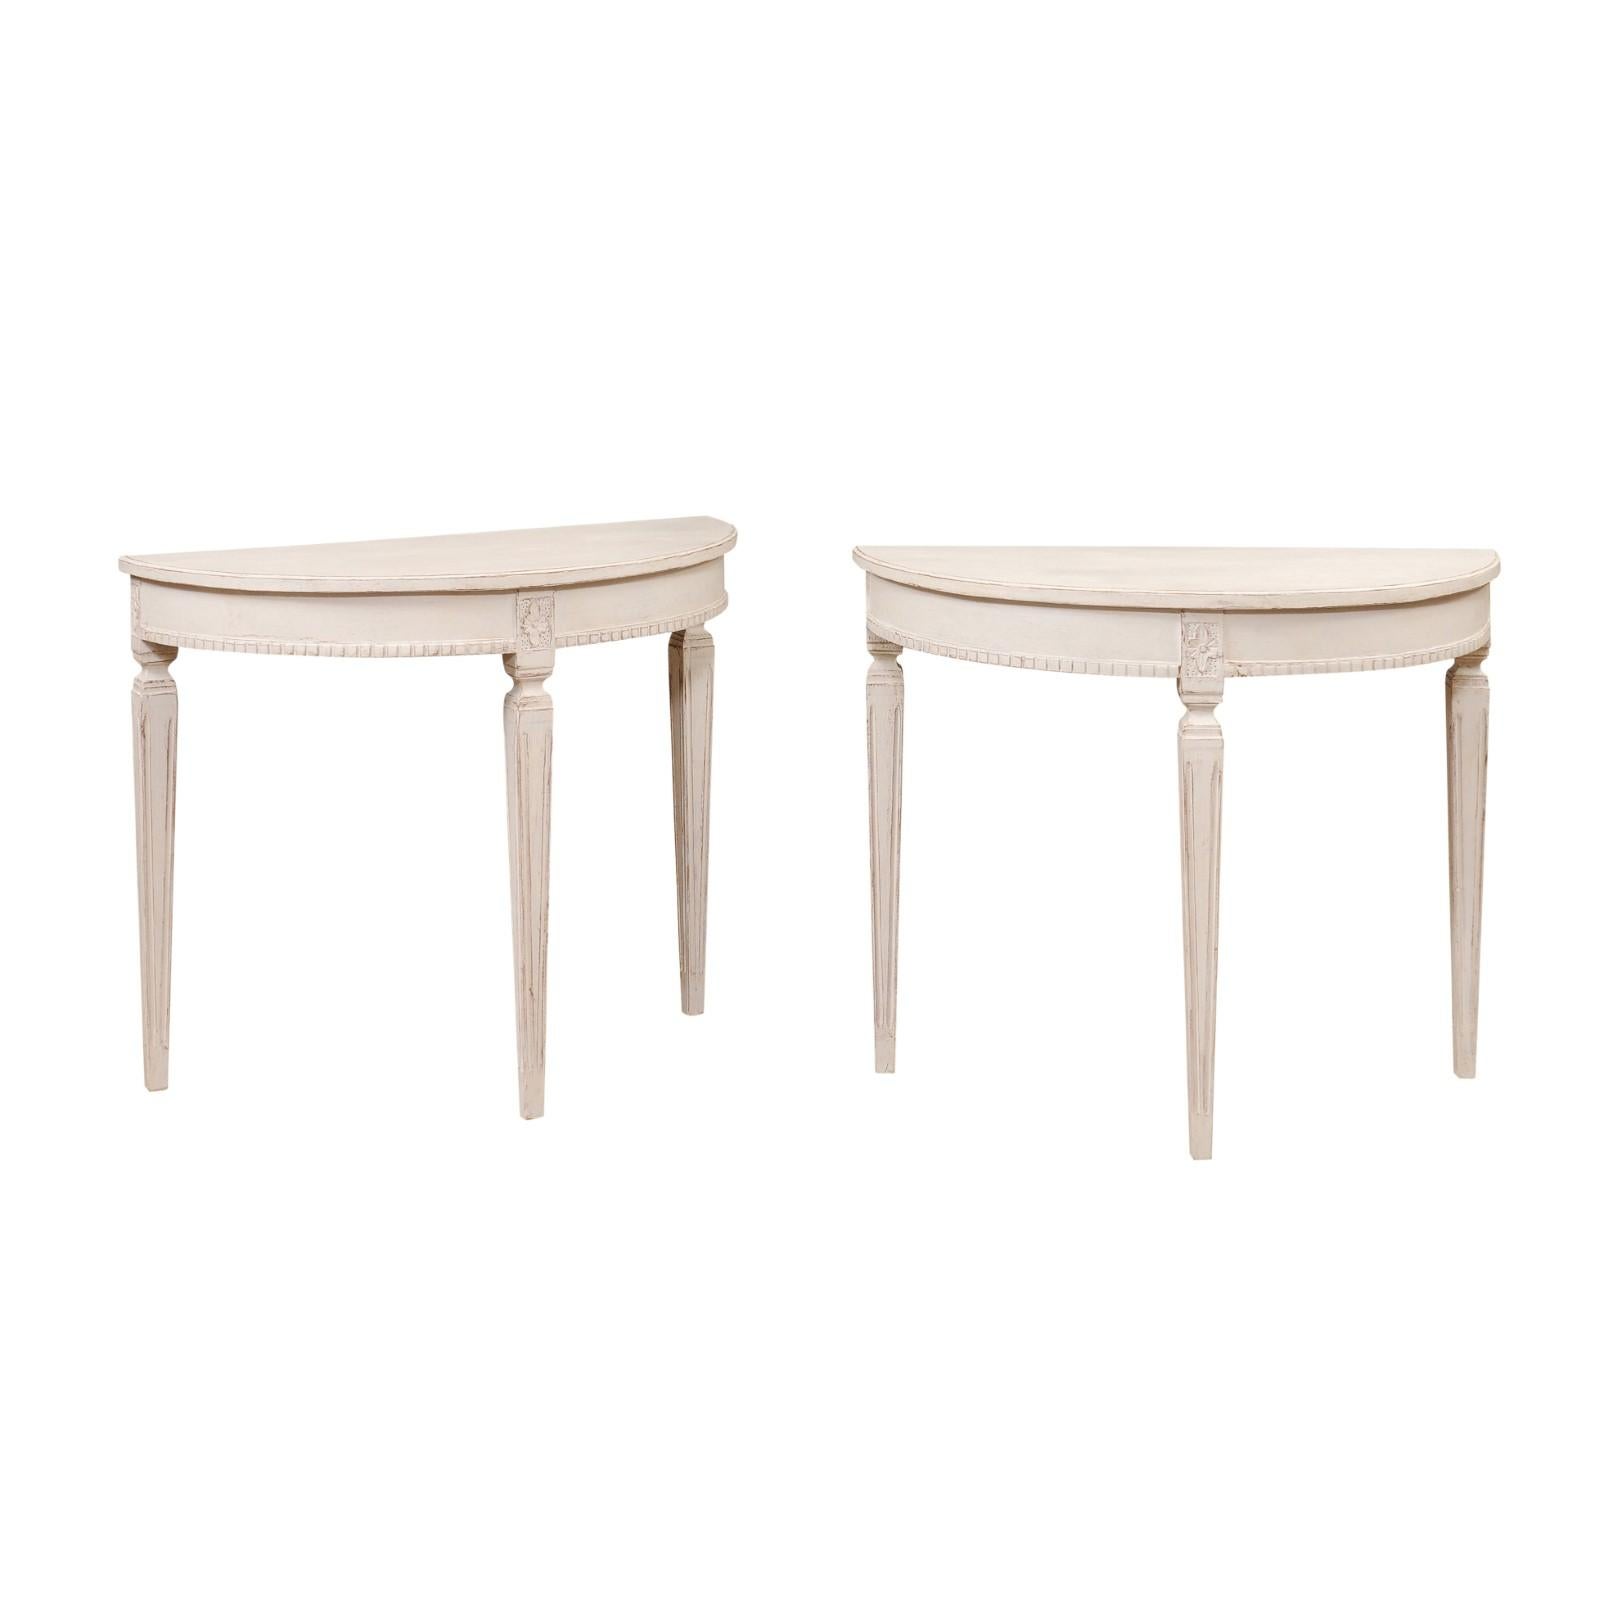 A pair of Swedish Gustavian style light gray / cream painted demi-lune console tables from circa 1880 with fluted tapered legs, dentil molding and carved rosettes on the knees. This pair of Swedish Gustavian style demi-lune console tables, crafted